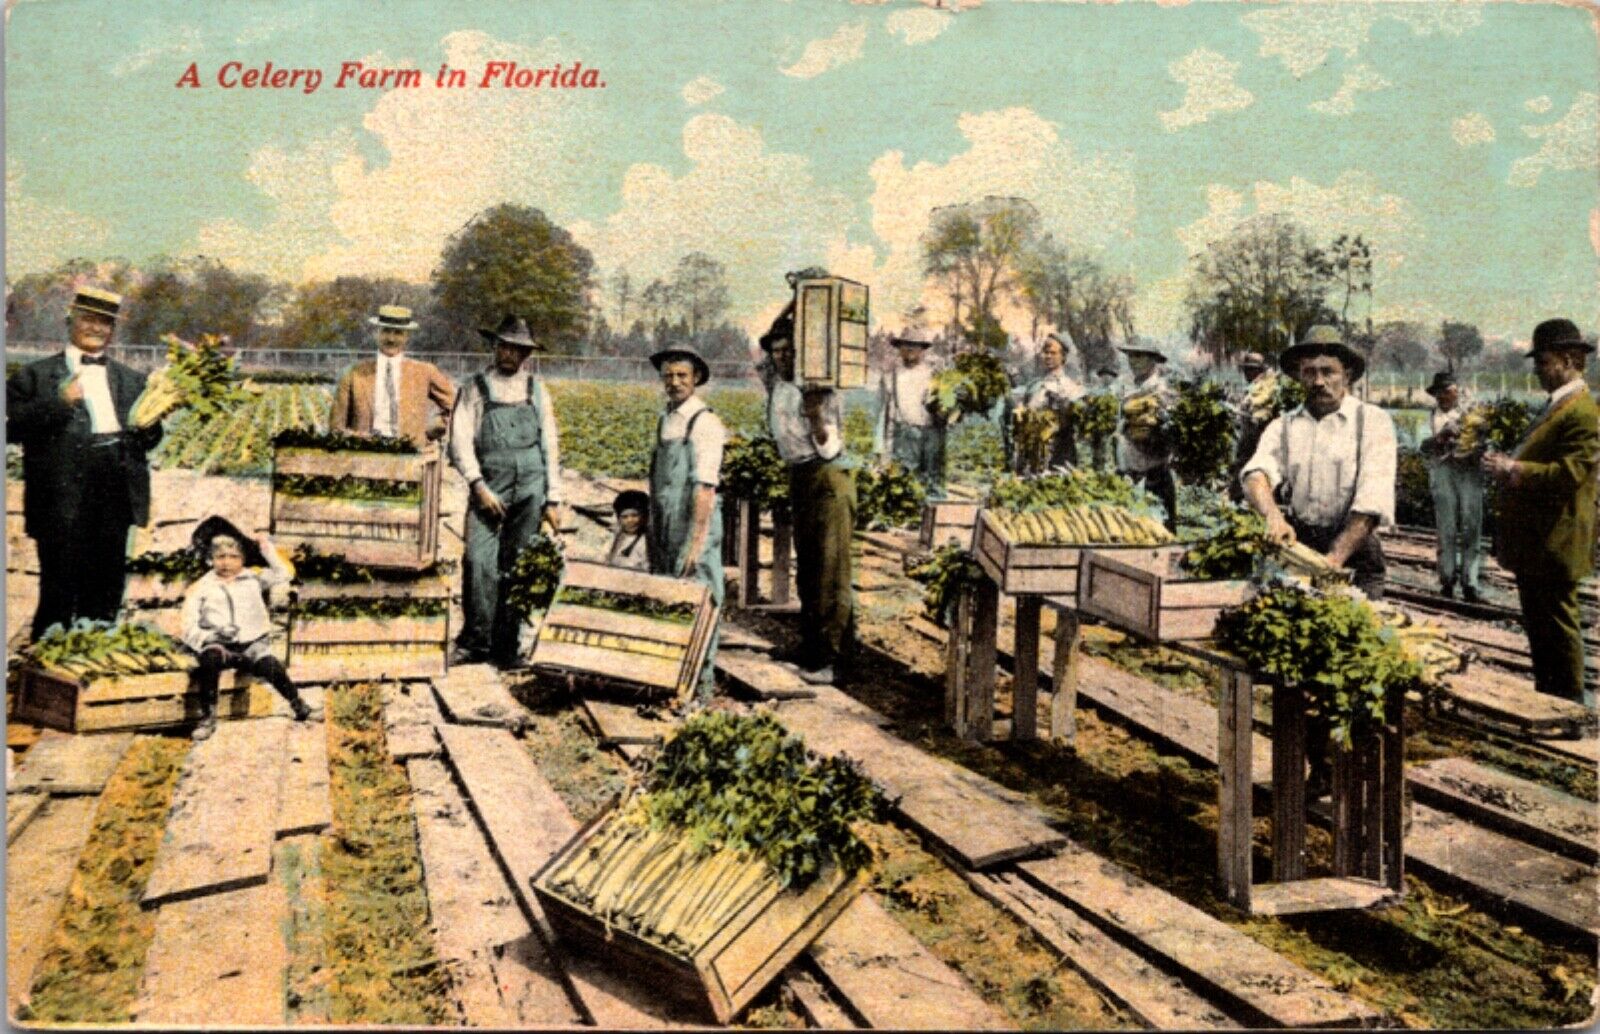 Postcard Workers at a Celery Farm in Florida